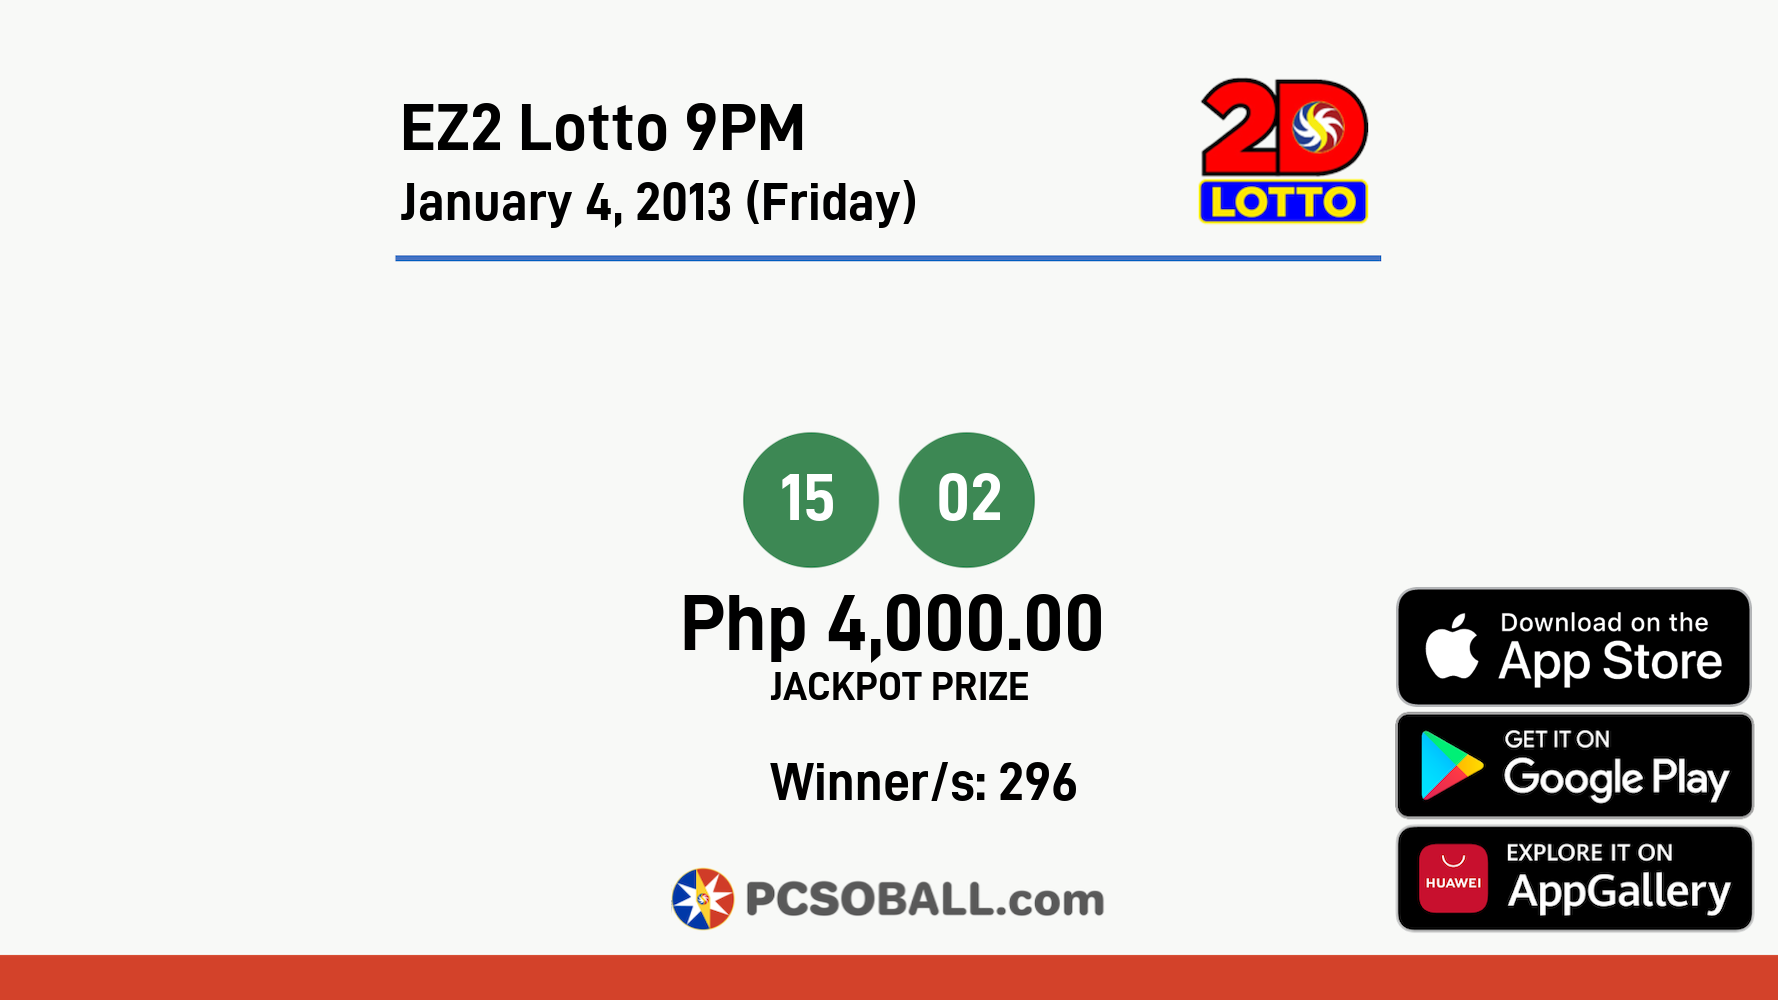 EZ2 Lotto 9PM January 4, 2013 (Friday) Result